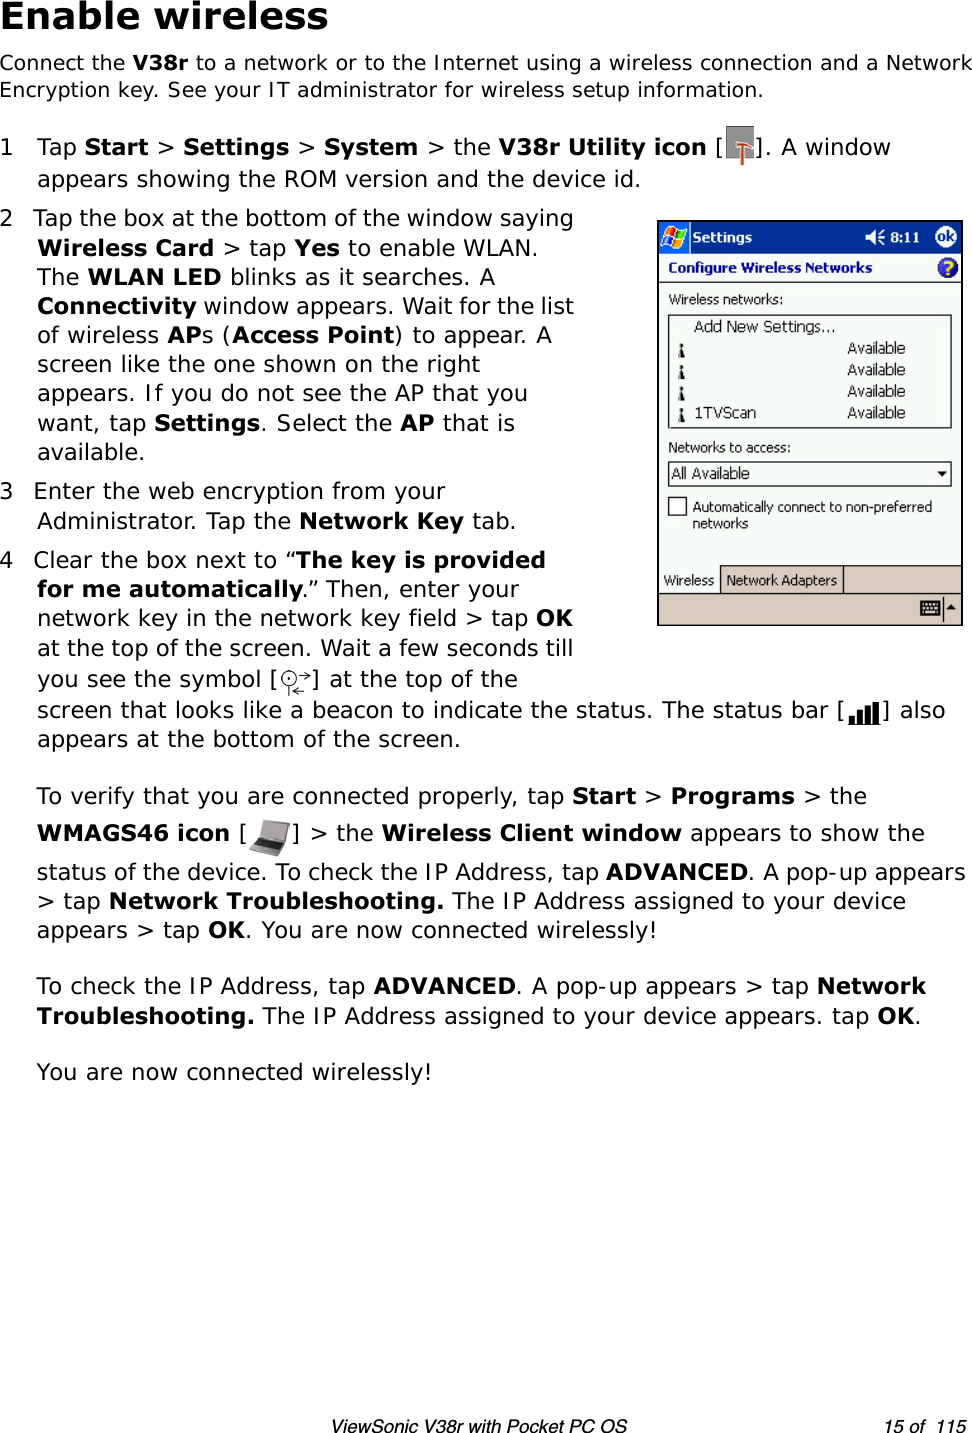 ViewSonic V38r with Pocket PC OS 15 of  115Enable wirelessConnect the V38r to a network or to the Internet using a wireless connection and a NetworkEncryption key. See your IT administrator for wireless setup information.1Tap Start &gt; Settings &gt; System &gt; the V38r Utility icon []. A window appears showing the ROM version and the device id.2 Tap the box at the bottom of the window saying Wireless Card &gt; tap Yes to enable WLAN. The WLAN LED blinks as it searches. A Connectivity window appears. Wait for the list of wireless APs (Access Point) to appear. A screen like the one shown on the right appears. If you do not see the AP that you want, tap Settings. Select the AP that is available. 3 Enter the web encryption from your Administrator. Tap the Network Key tab. 4 Clear the box next to “The key is provided for me automatically.” Then, enter your network key in the network key field &gt; tap OK at the top of the screen. Wait a few seconds till you see the symbol [ ] at the top of the screen that looks like a beacon to indicate the status. The status bar [ ] also appears at the bottom of the screen.To verify that you are connected properly, tap Start &gt; Programs &gt; the WMAGS46 icon [] &gt; the Wireless Client window appears to show the status of the device. To check the IP Address, tap ADVANCED. A pop-up appears &gt; tap Network Troubleshooting. The IP Address assigned to your device appears &gt; tap OK. You are now connected wirelessly!To check the IP Address, tap ADVANCED. A pop-up appears &gt; tap Network Troubleshooting. The IP Address assigned to your device appears. tap OK.You are now connected wirelessly! 